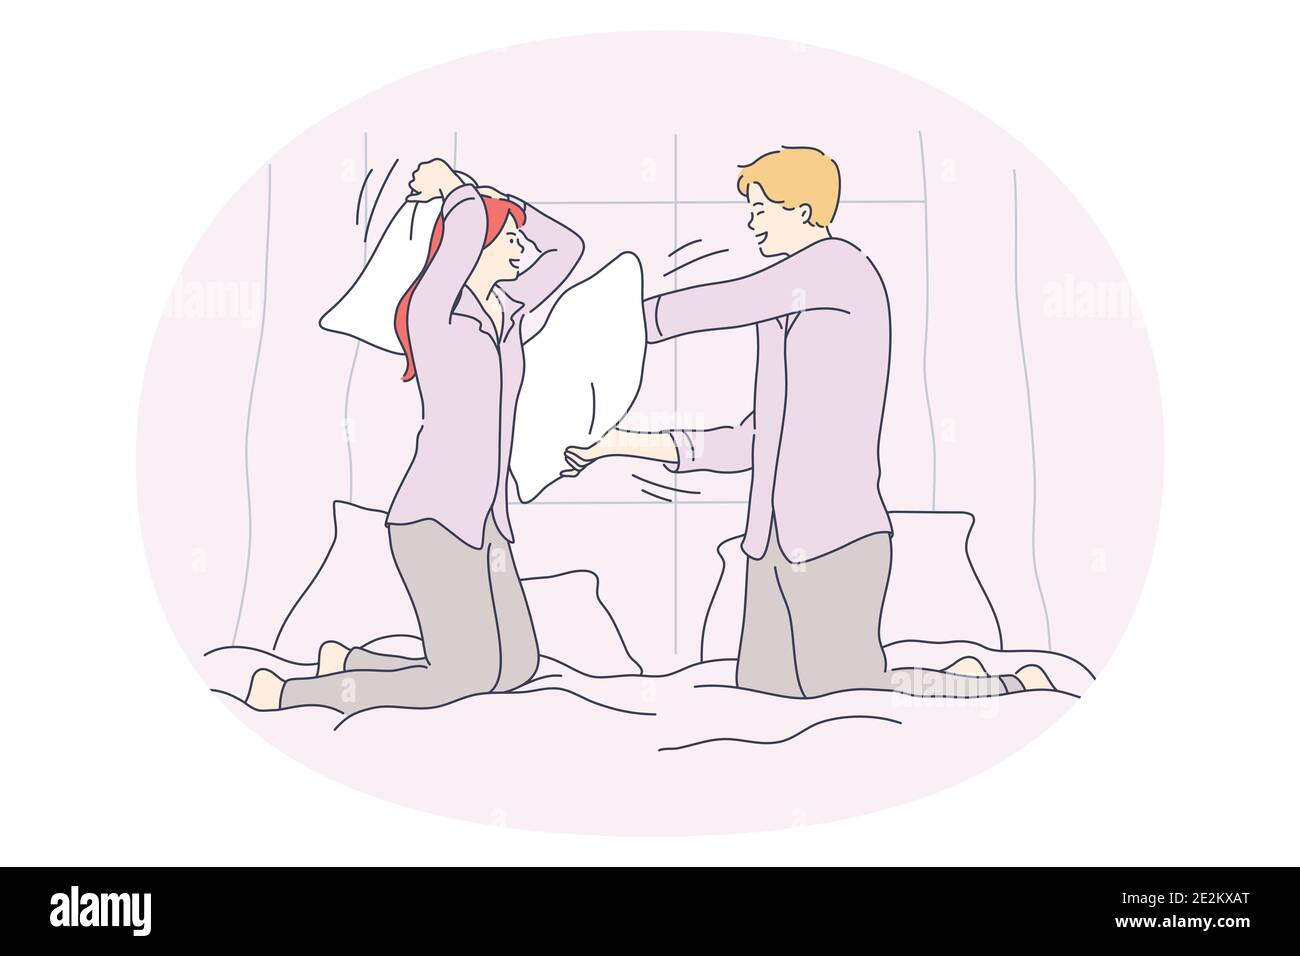 Pillow fighting and battle concept Stock Vector